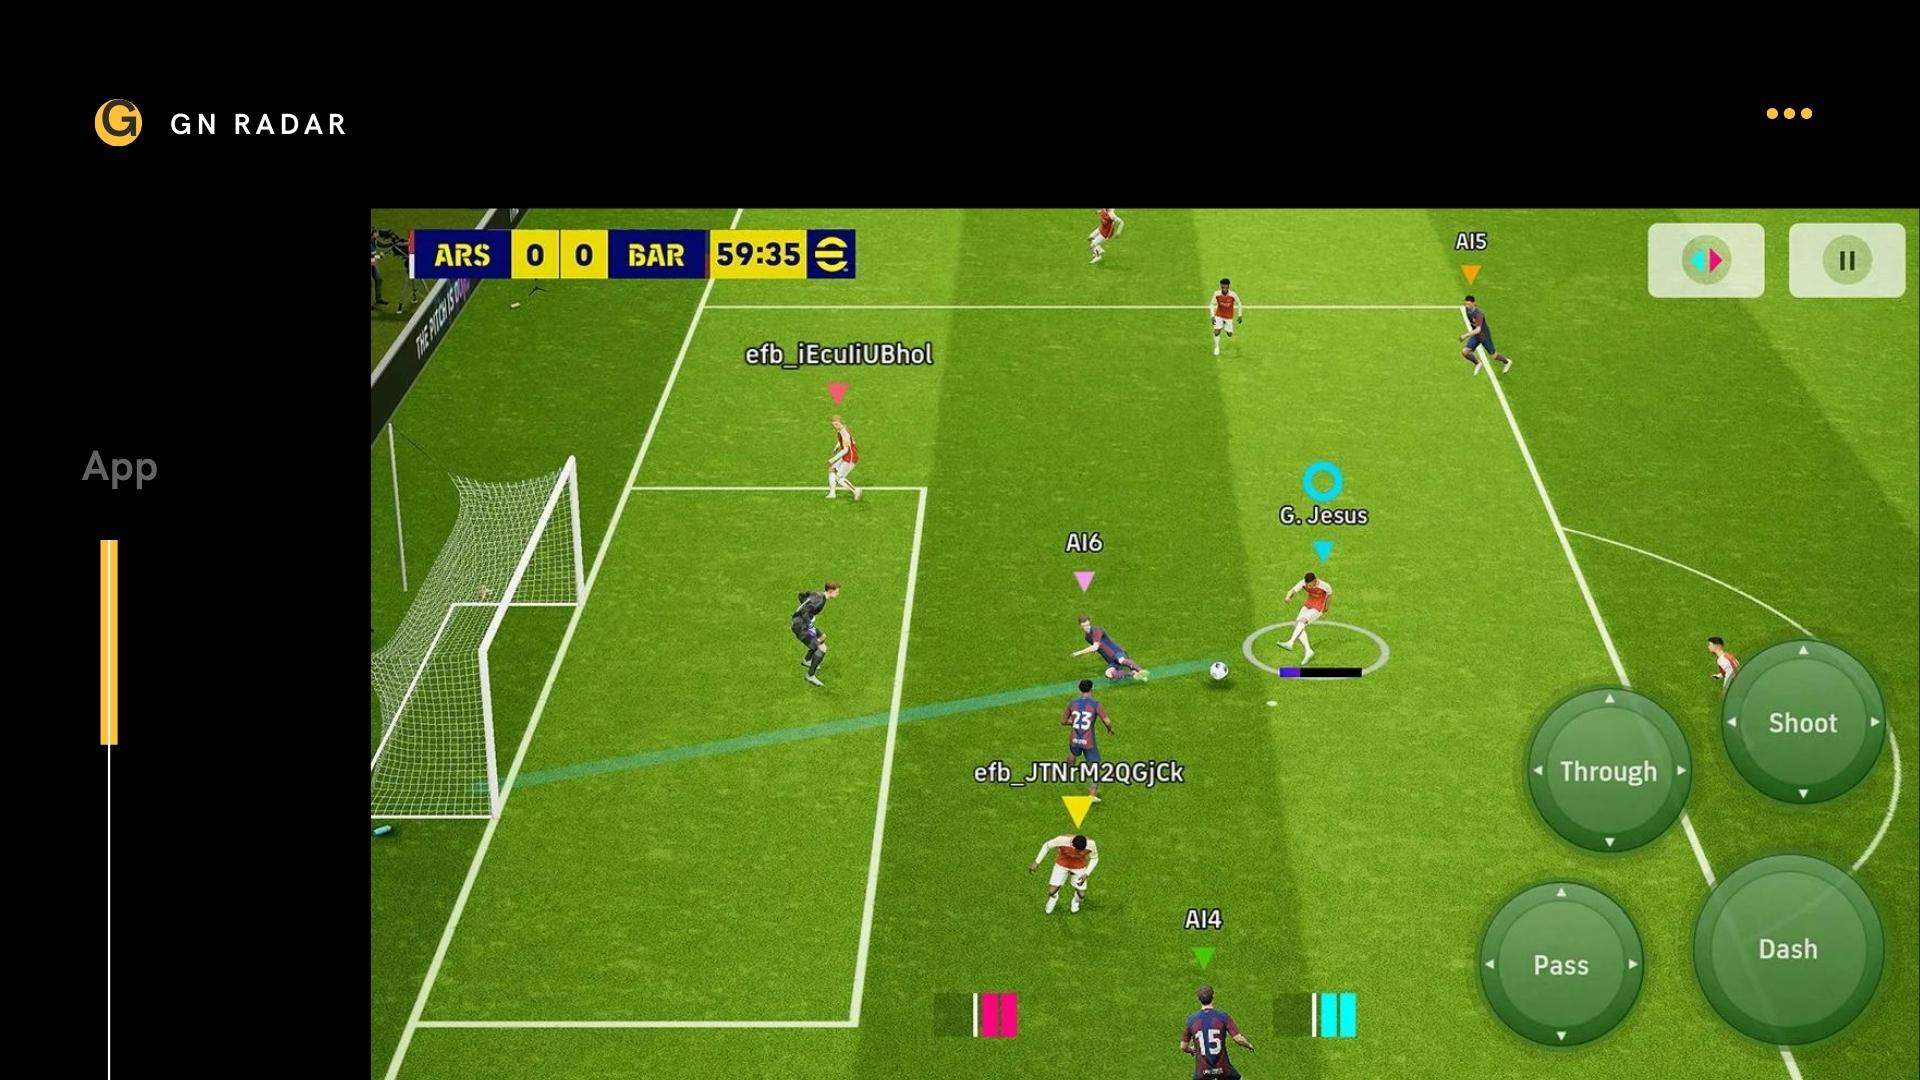 Download eFootball 2024 8.2.0 APK for android